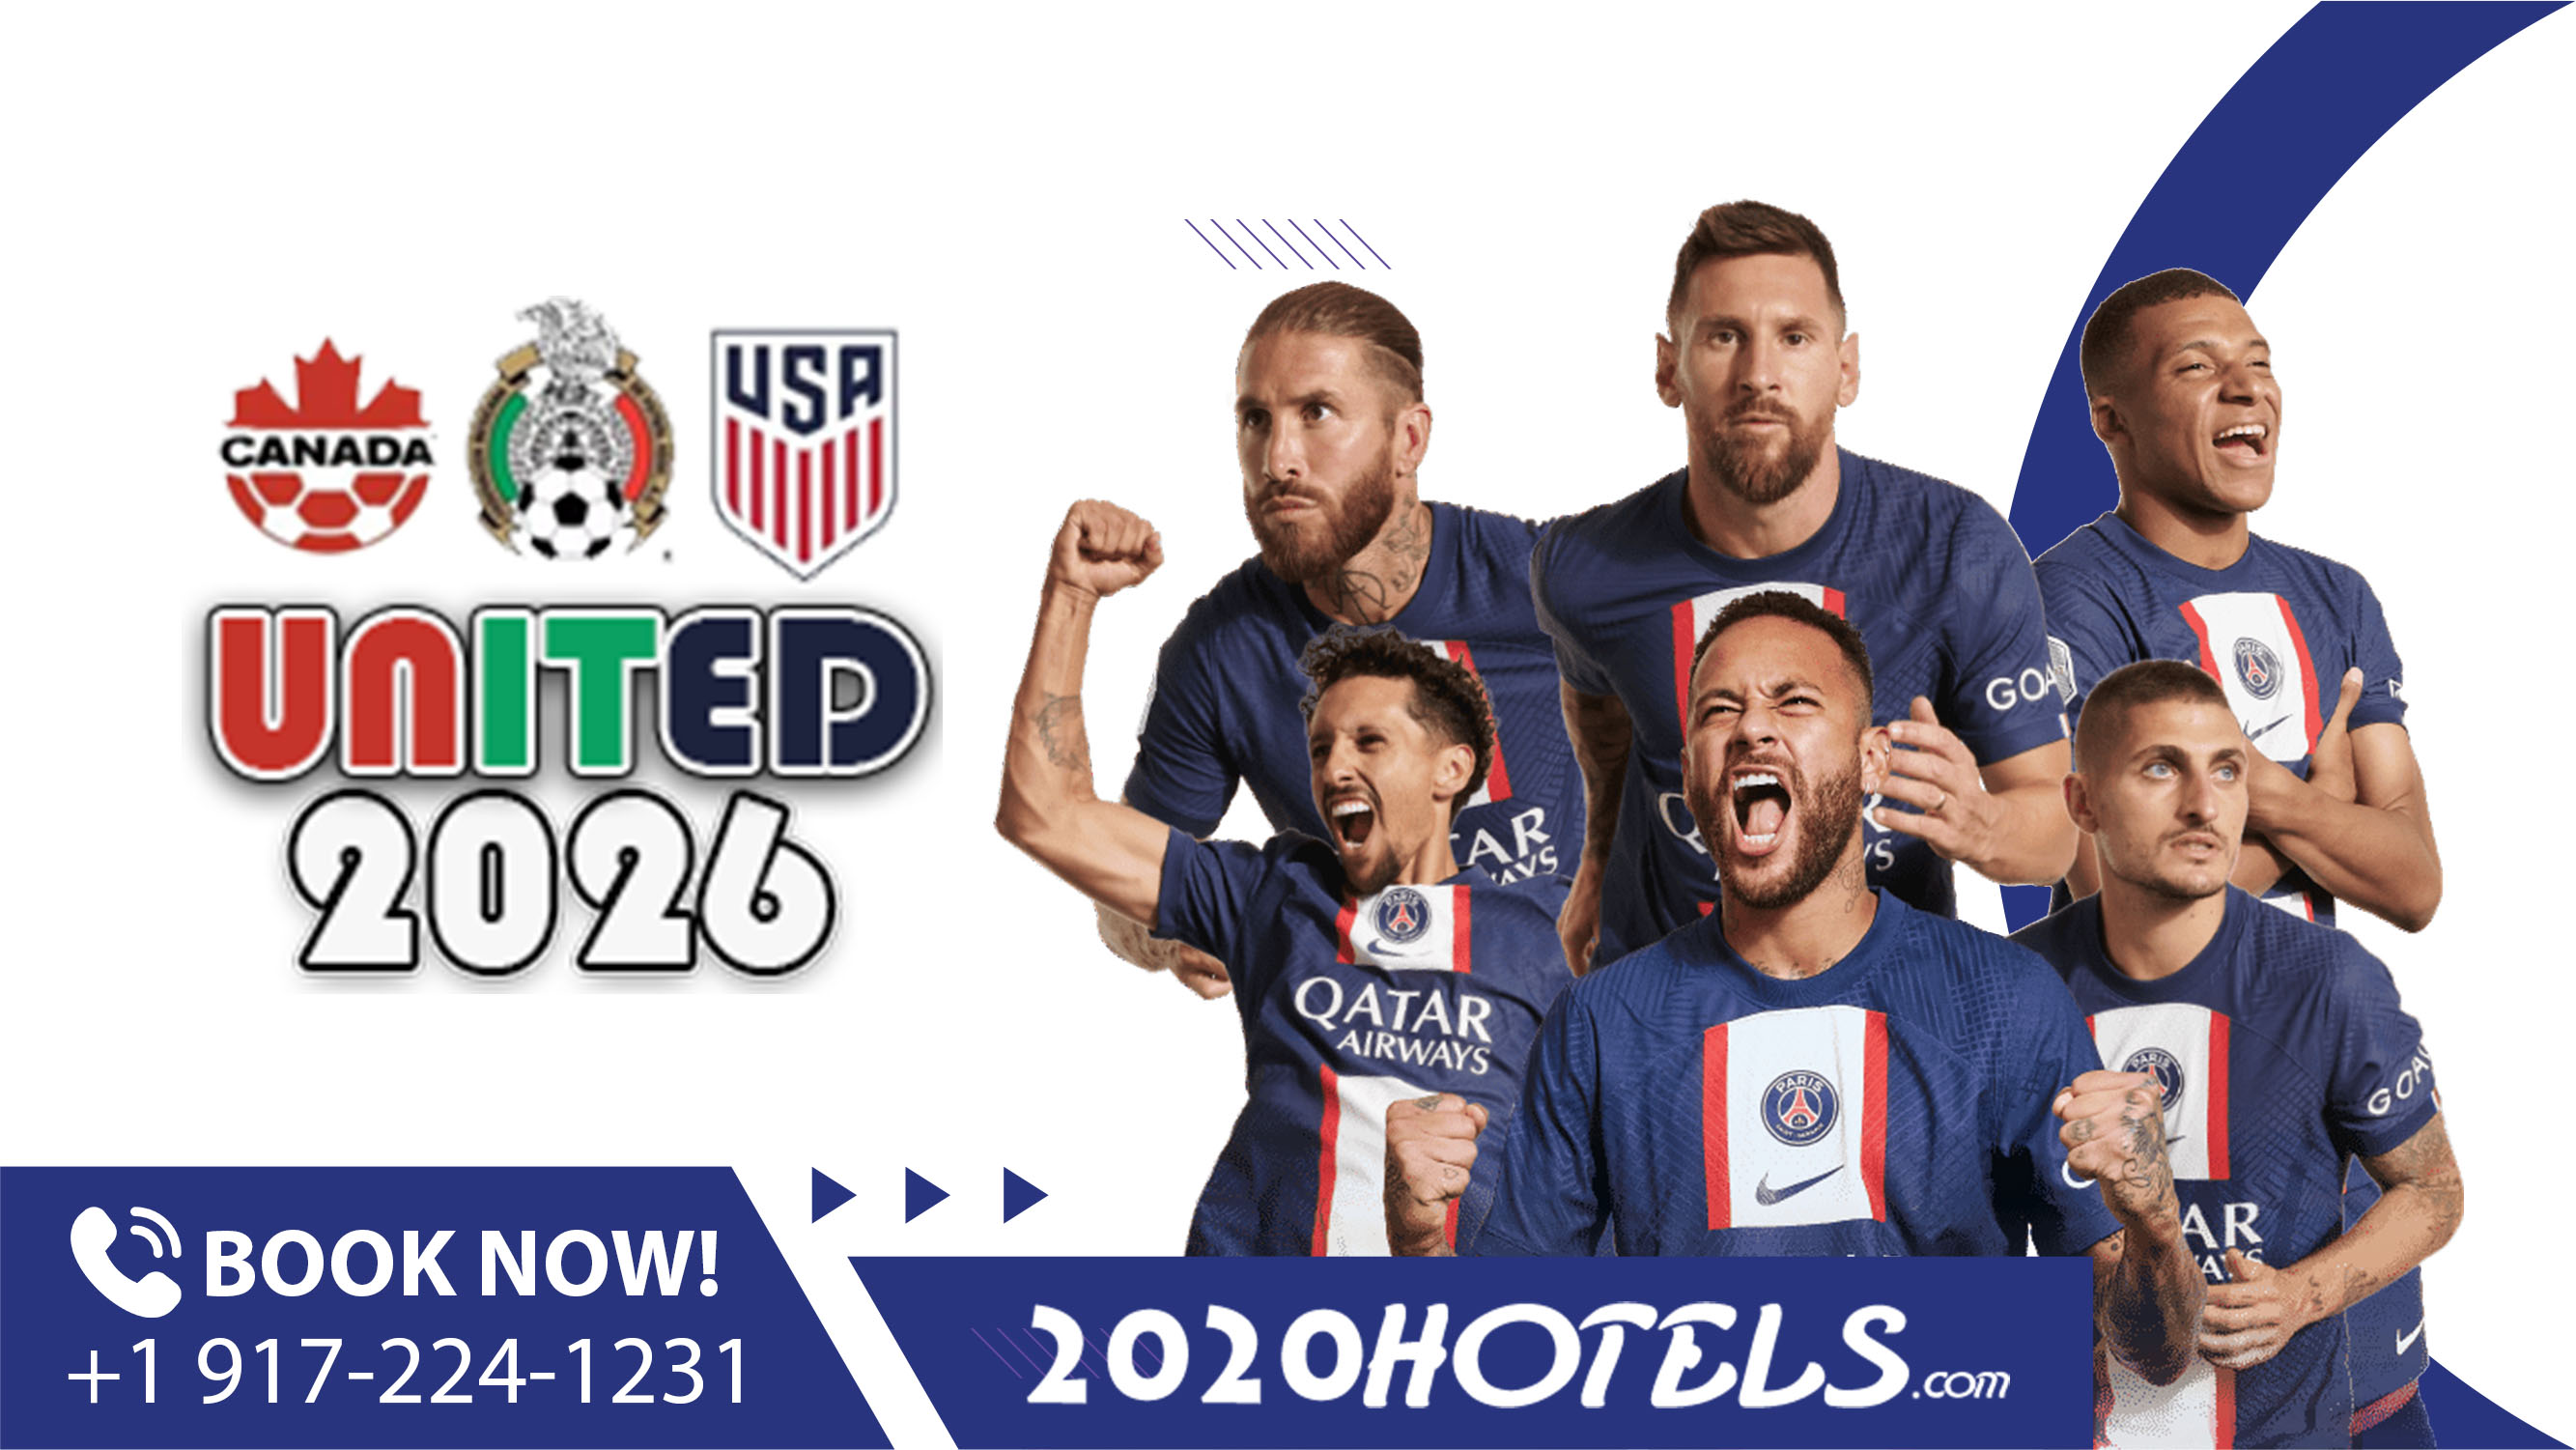 Book now FIFA World Cup Hotels, last minute deals on hotels and packages only @ 2020hotels.com click here to book!